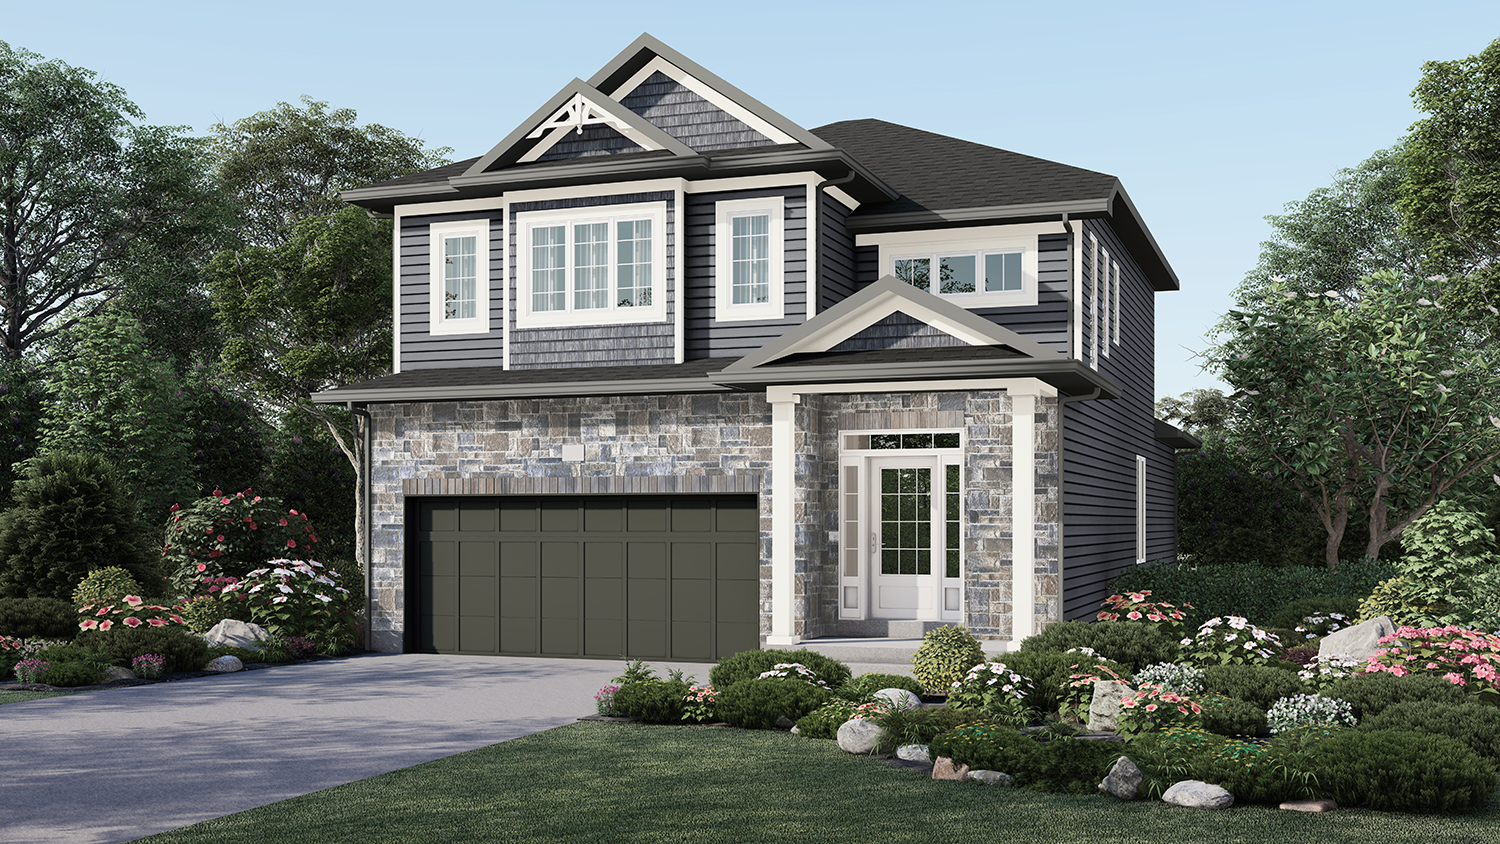 Exterior Rendering - Single Family House - Pearson